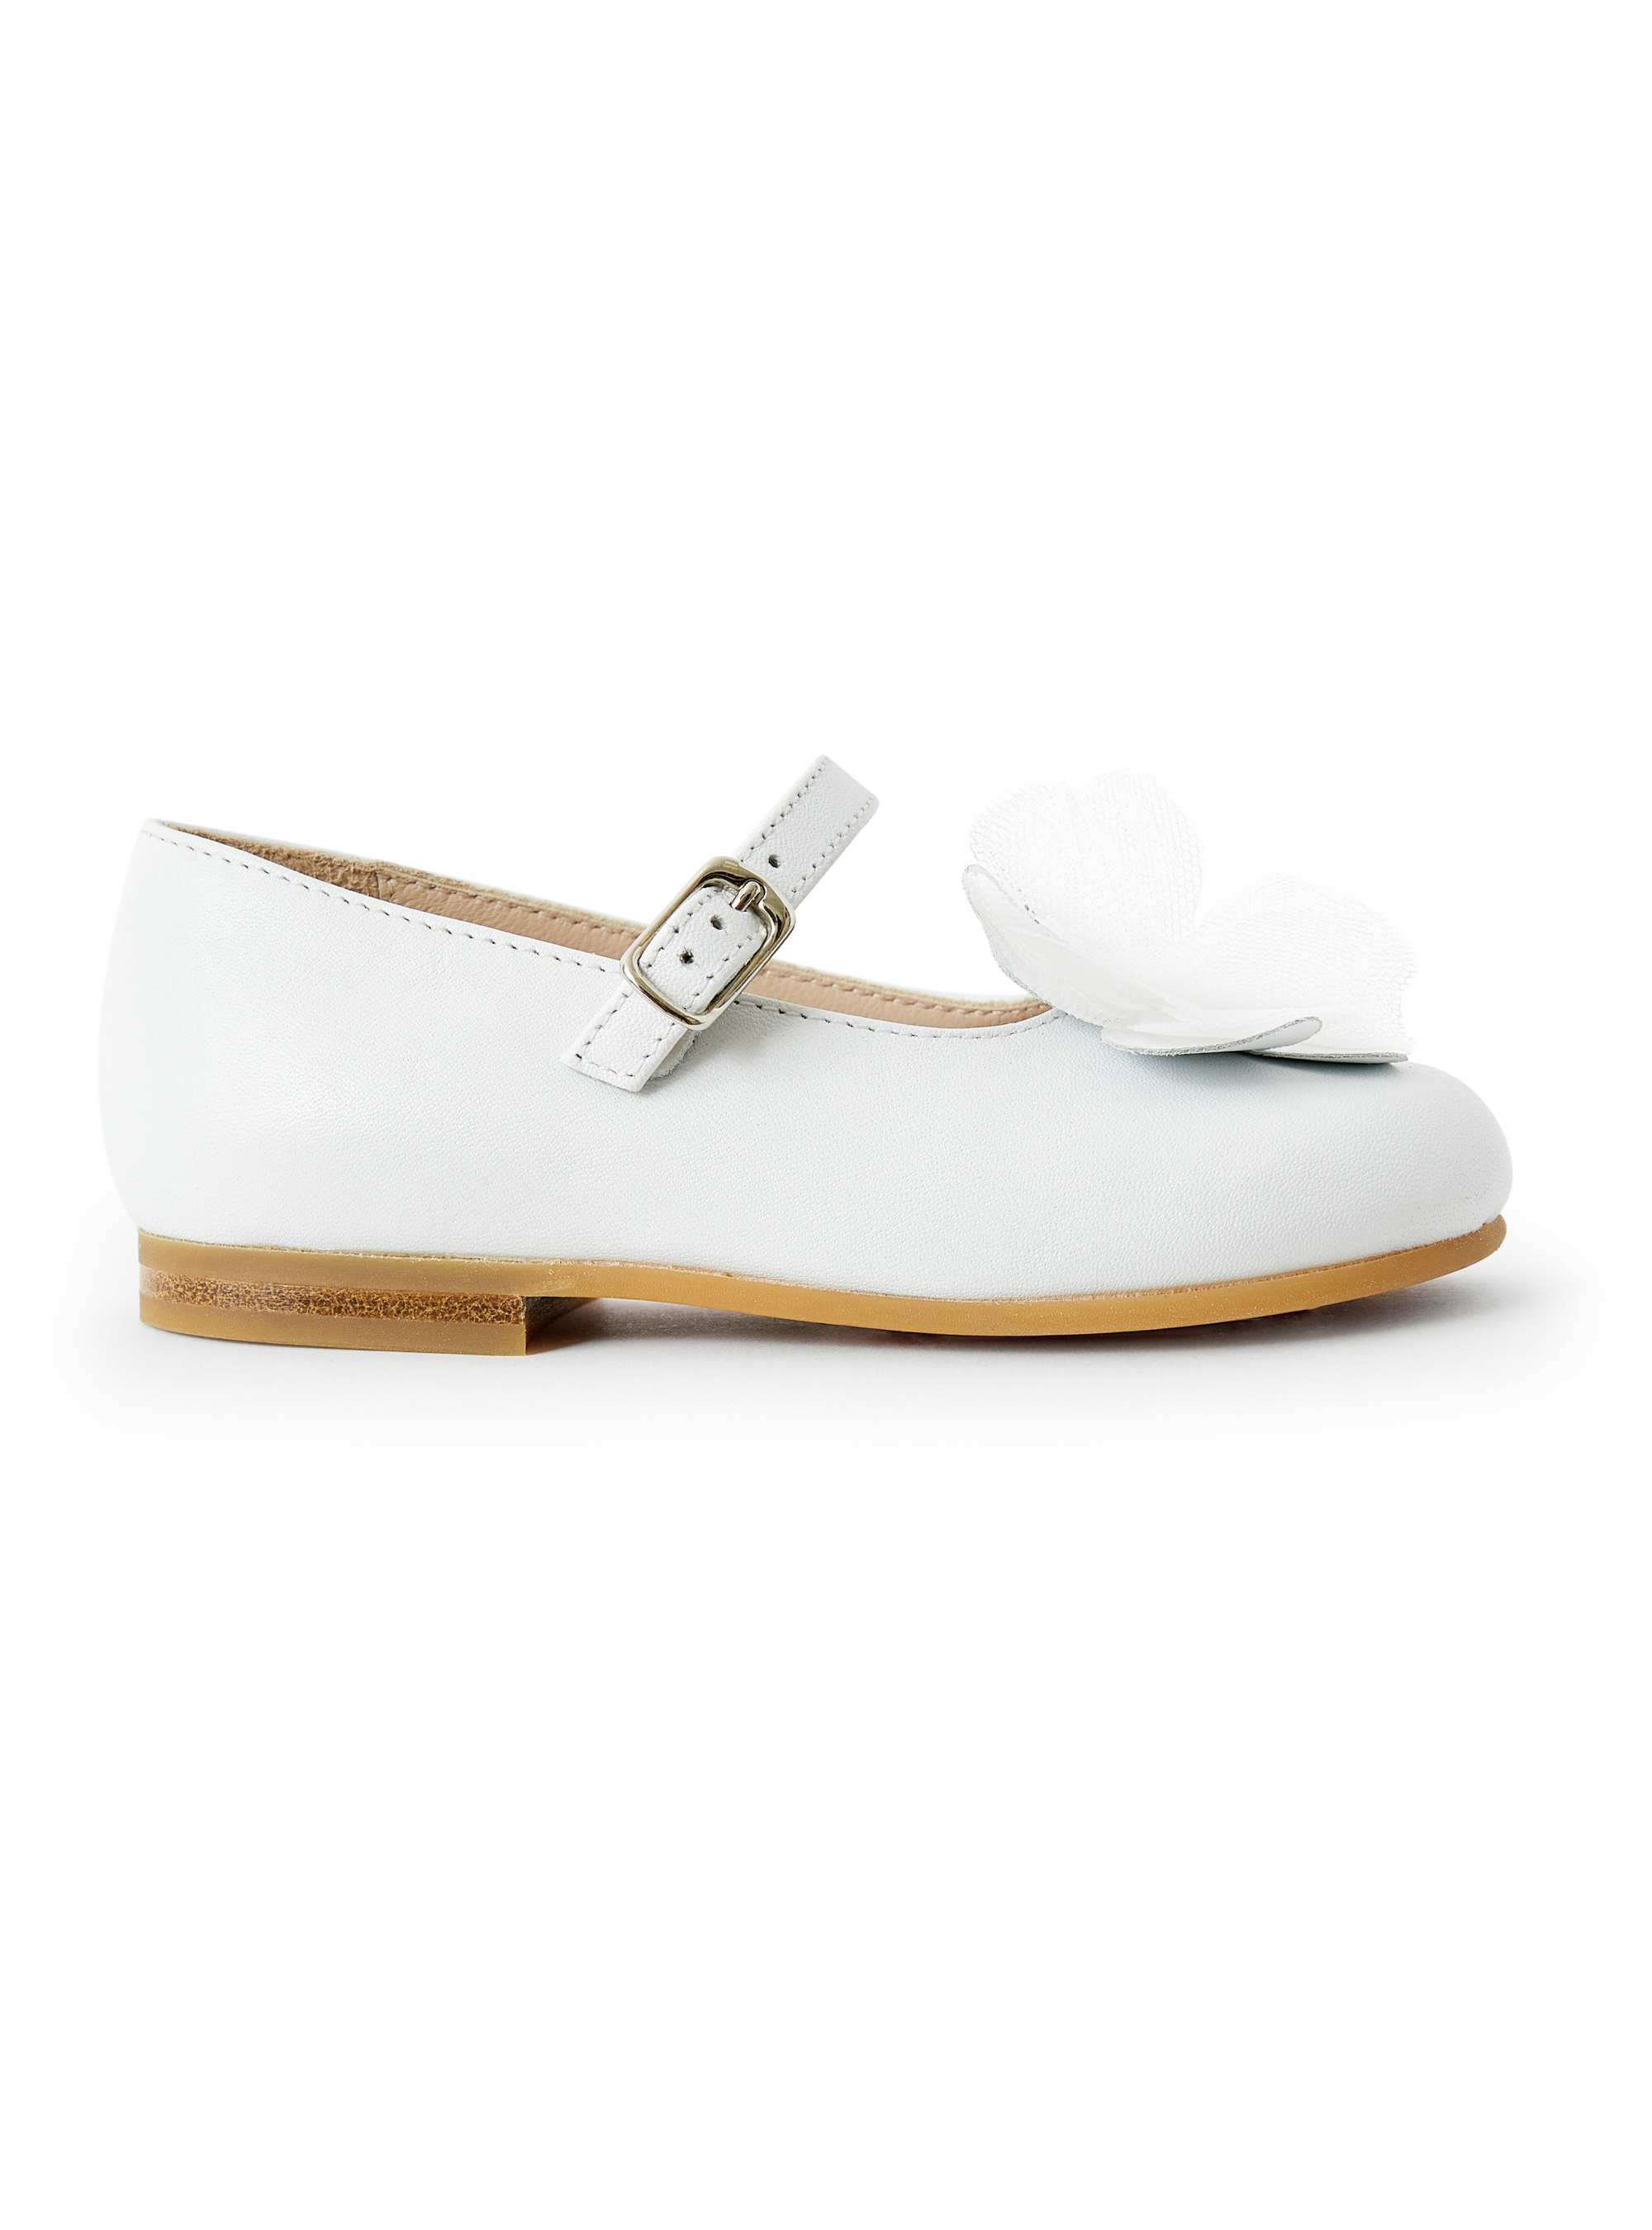 Chaussures plates blanches avec tulle - Blanc | Il Gufo